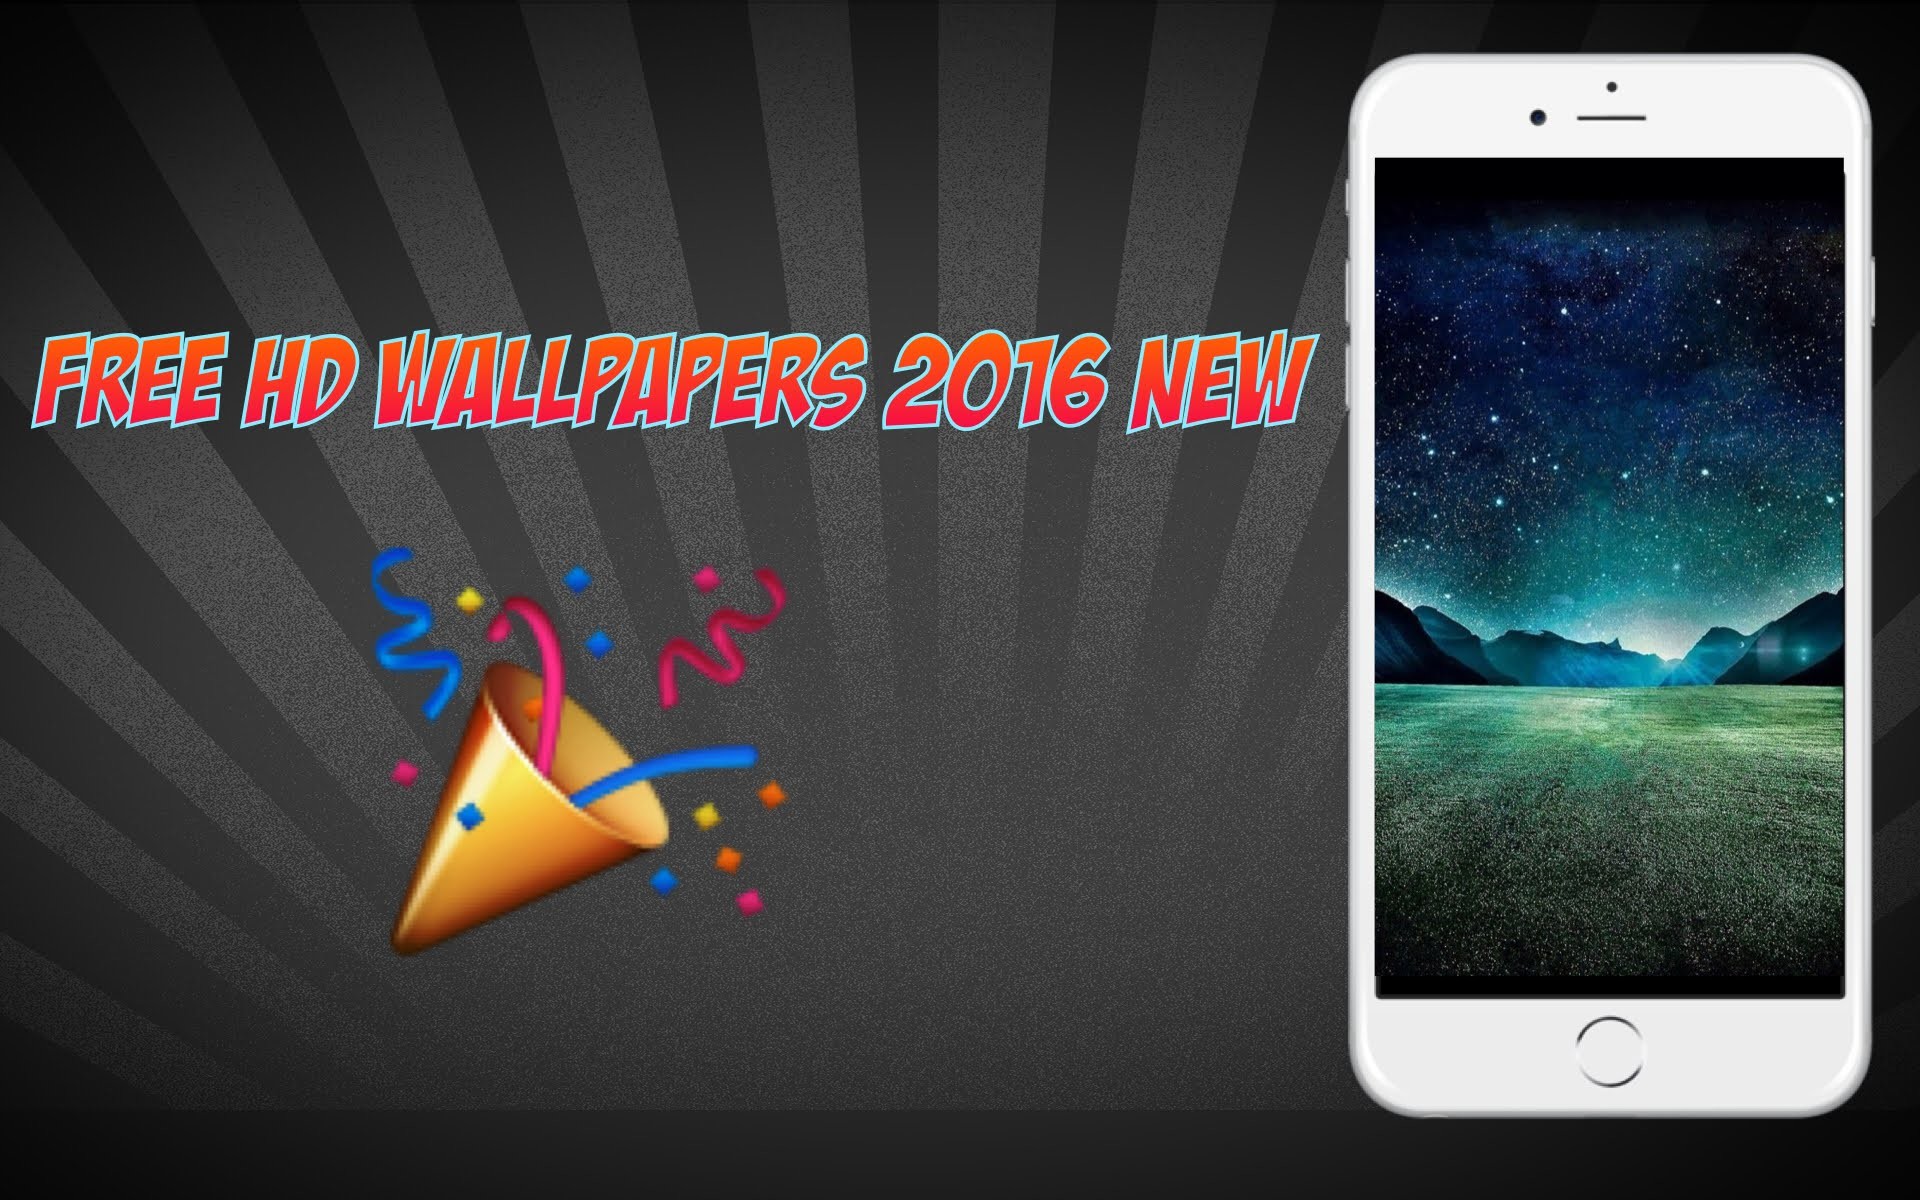 1920x1200 HD Wallpapers FREE iOS 9 - 9.1/9.2/9.2.1/9.3 iPhone and iPod touch 2016